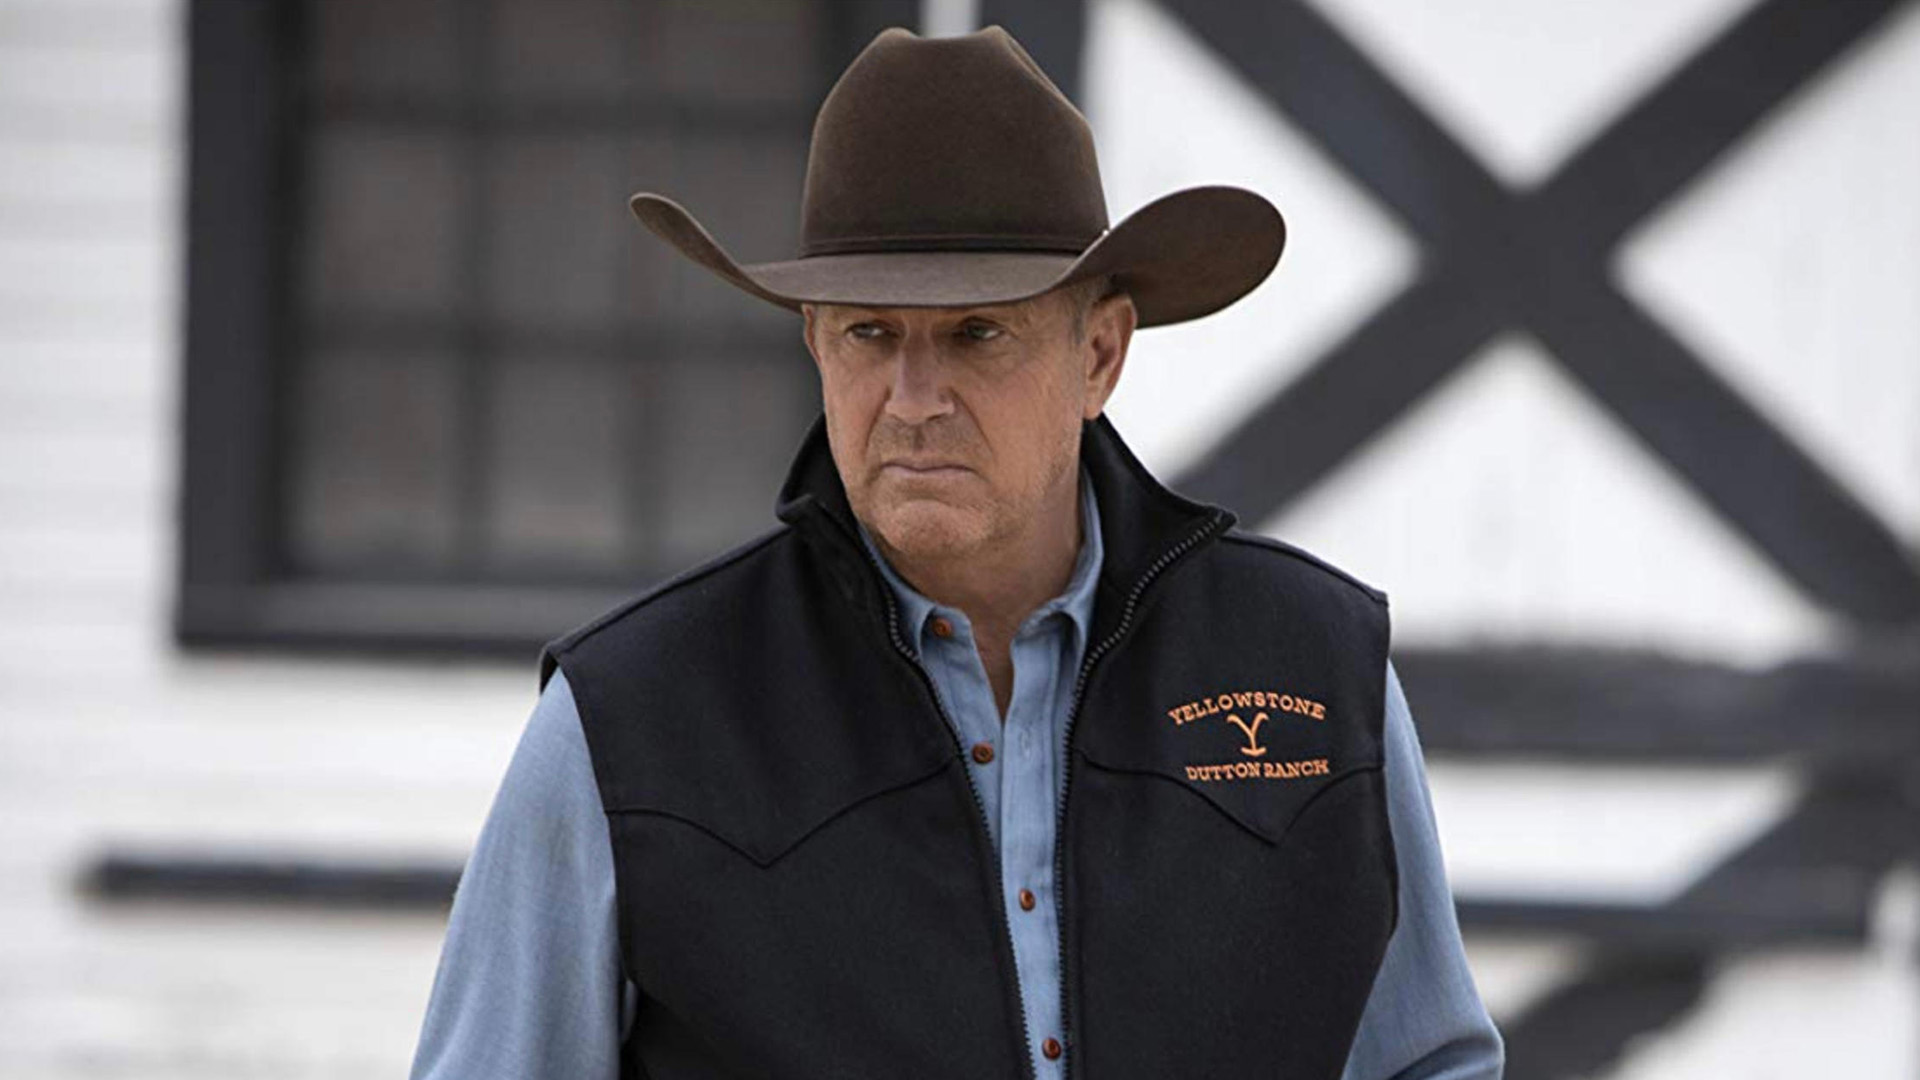 Is John Dutton's Death the Change Yellowstone Needs? Fans Weigh In